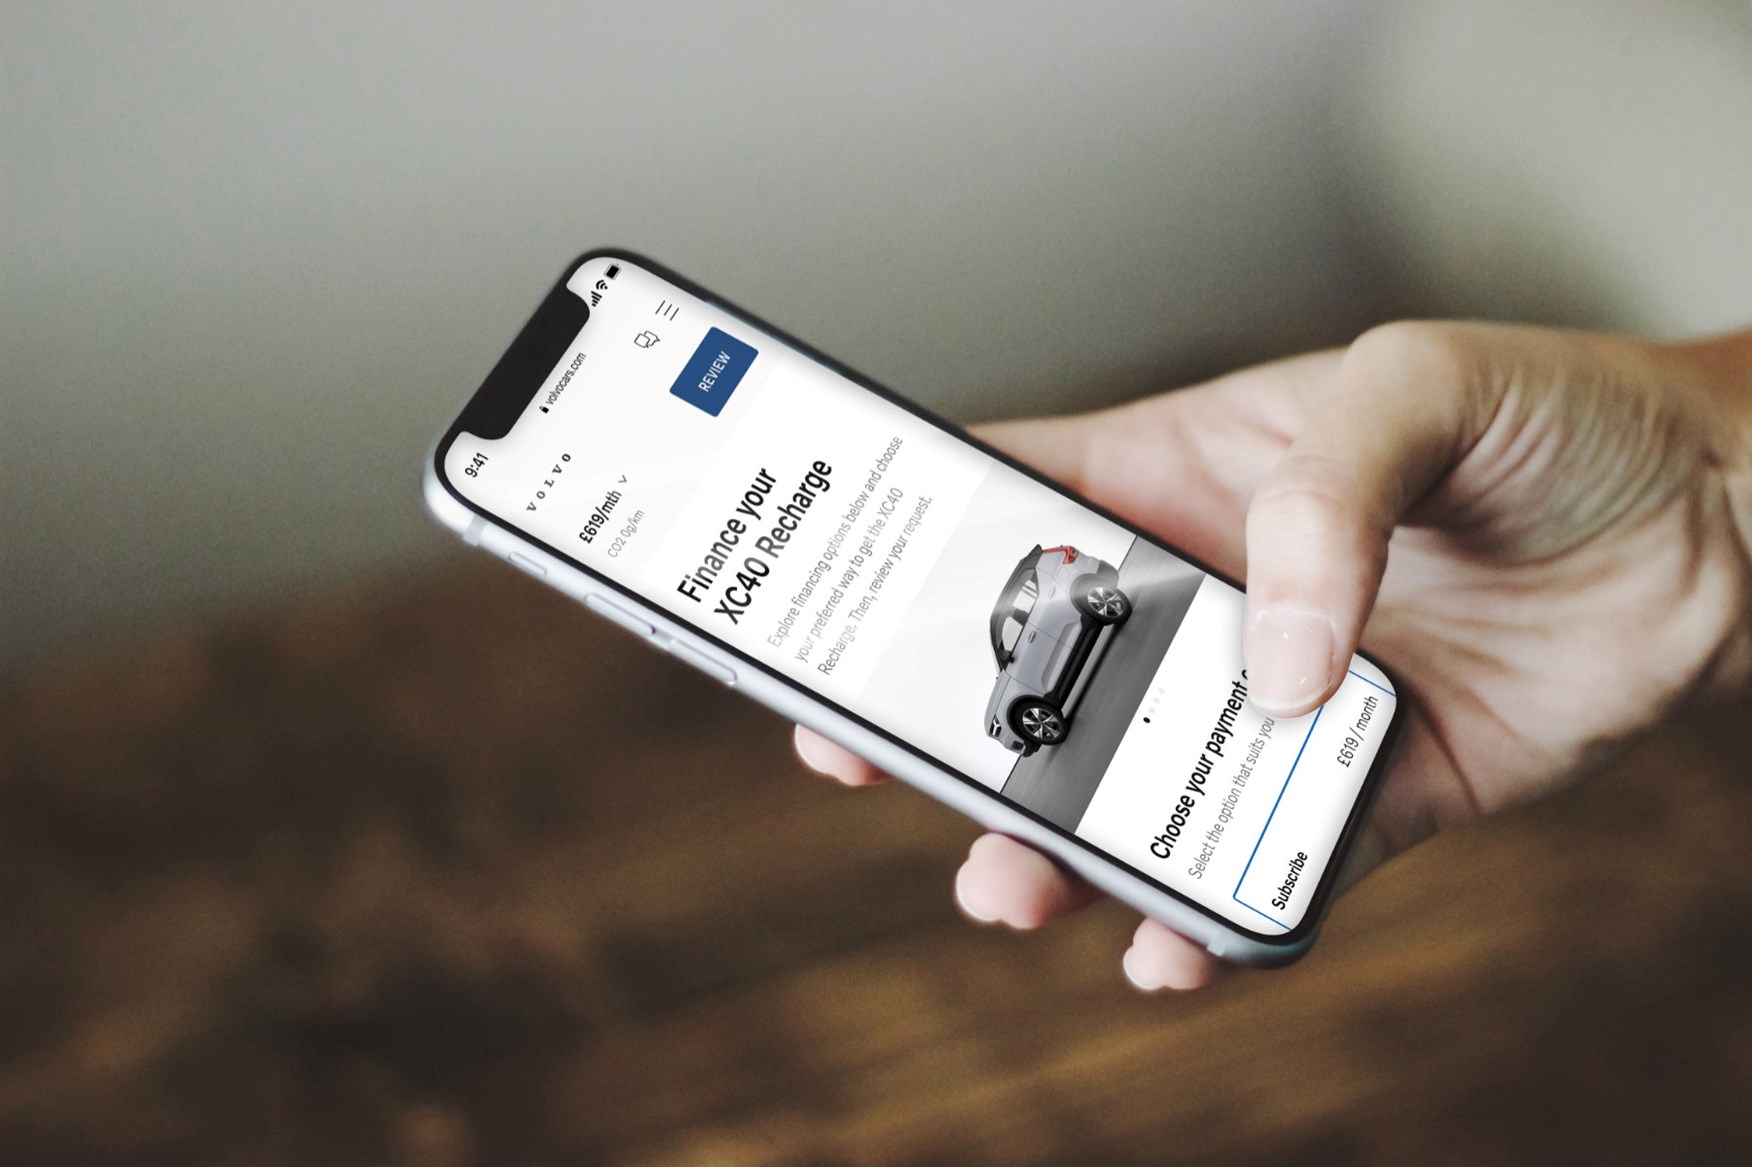 Care by Volvo subscription service guide